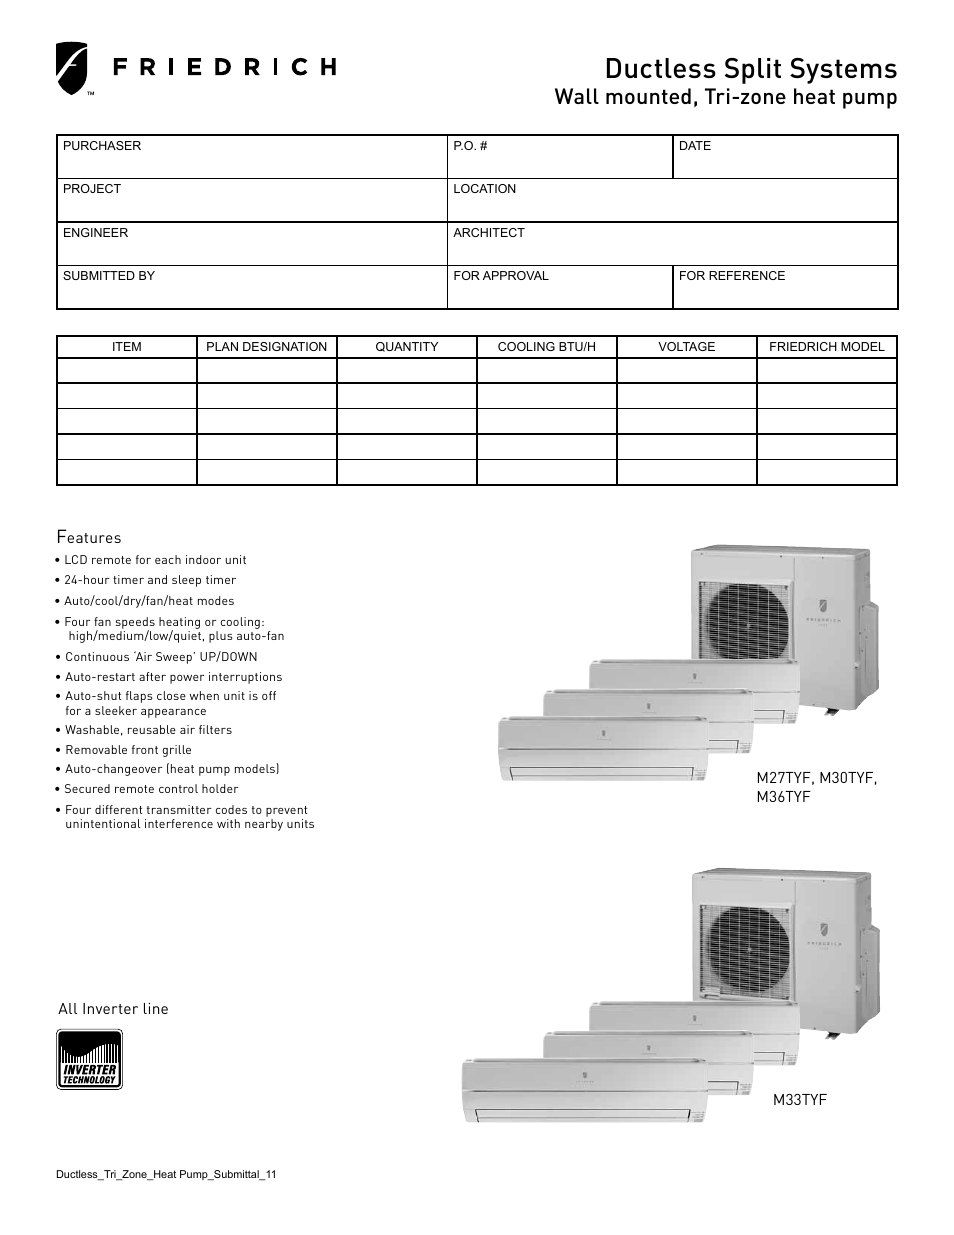 DUCTLESS SPLIT SYSTEMS M36TYF1